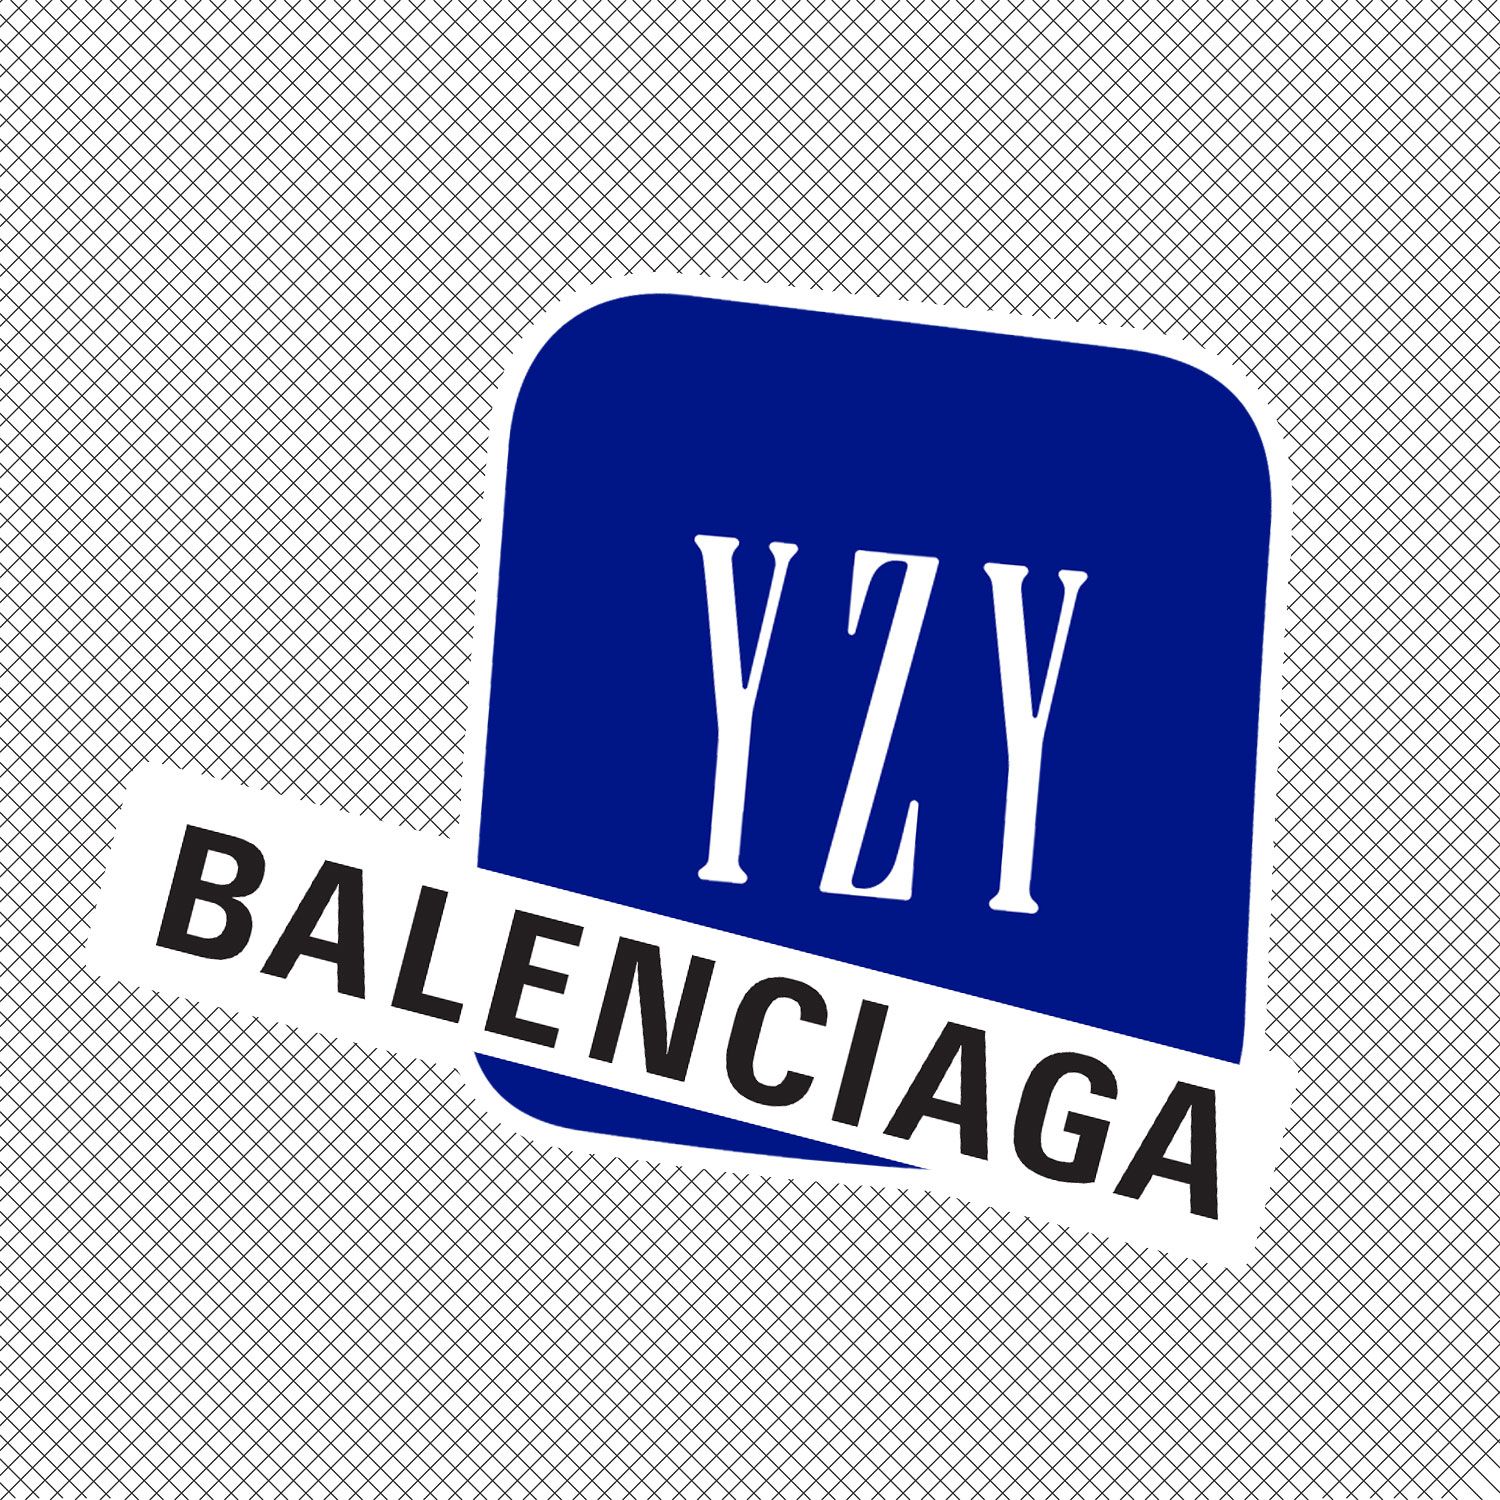 Balenciaga Announces It Will No Longer Work With Kanye West